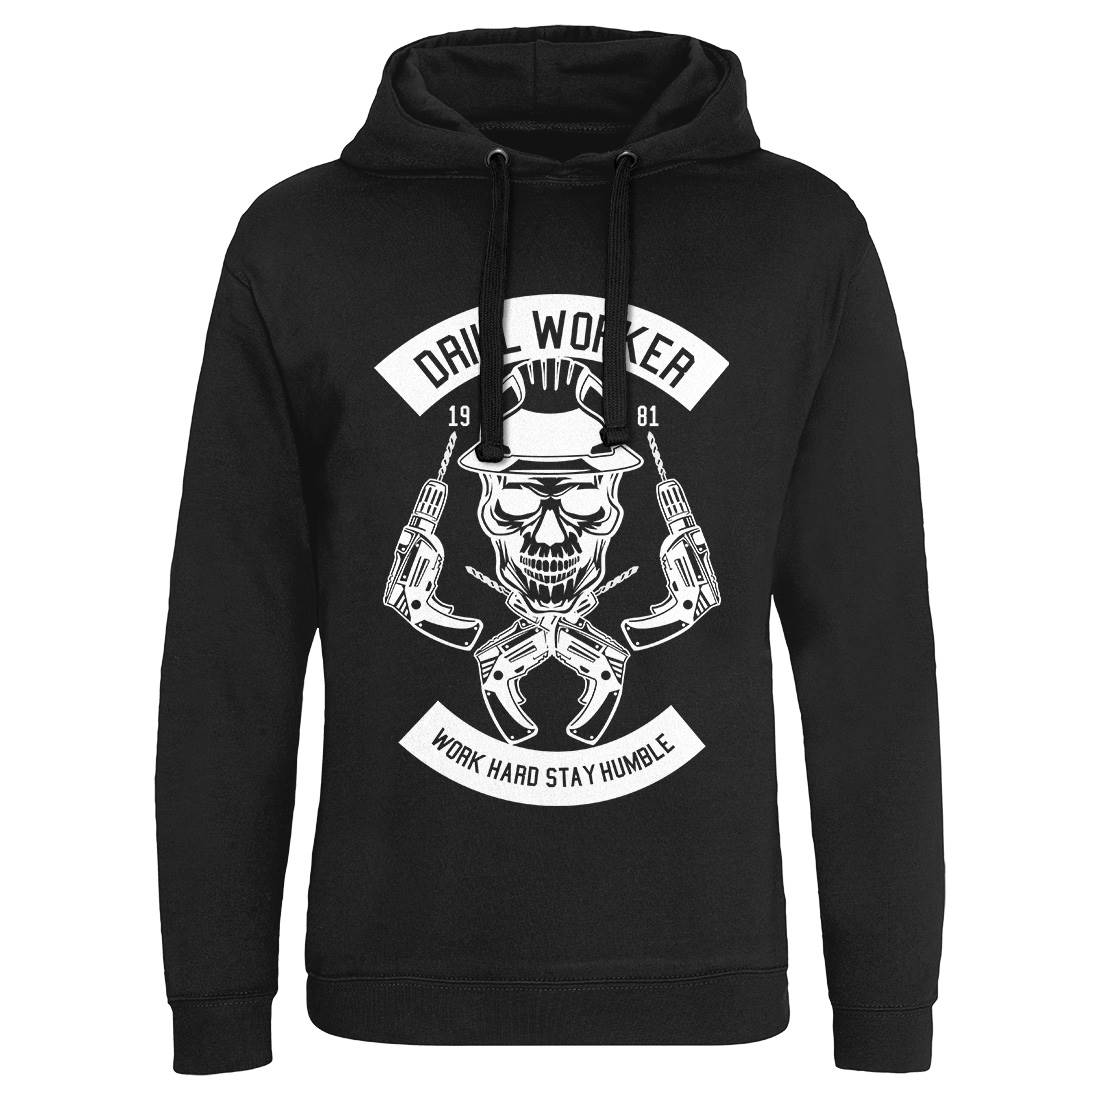 Drill Worker Mens Hoodie Without Pocket Retro B535